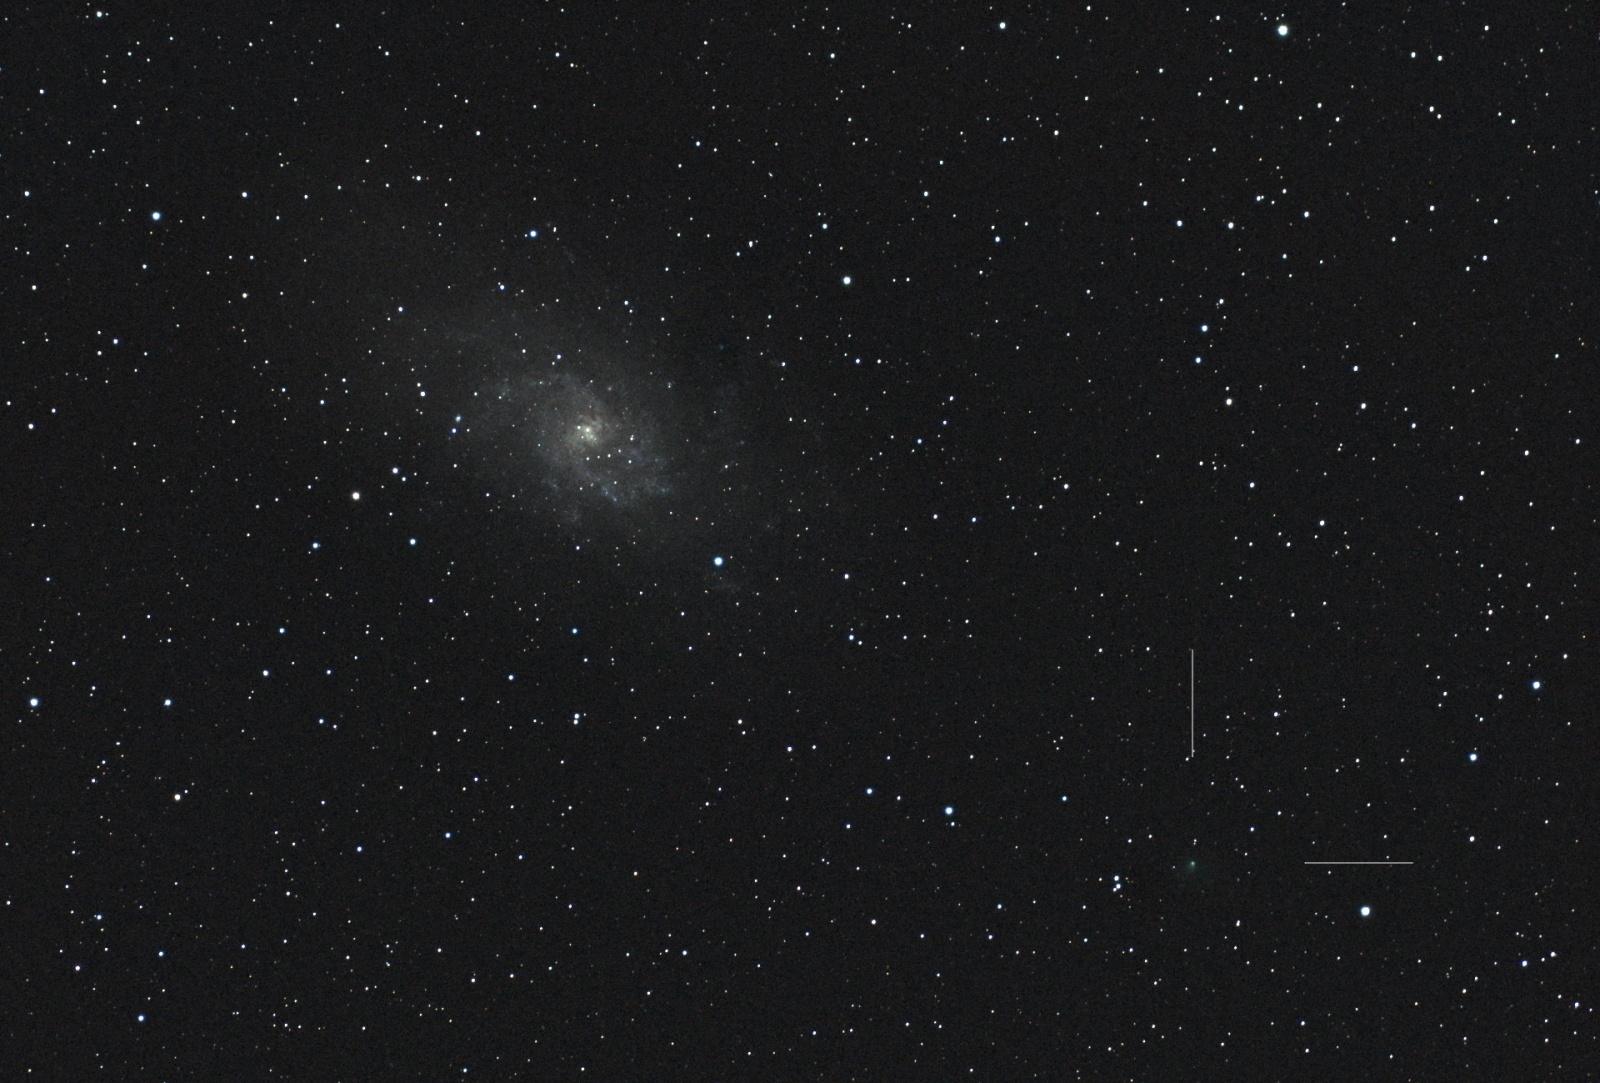 M33_156P_33x20s_ISO_1600_color1_wsk.jpg